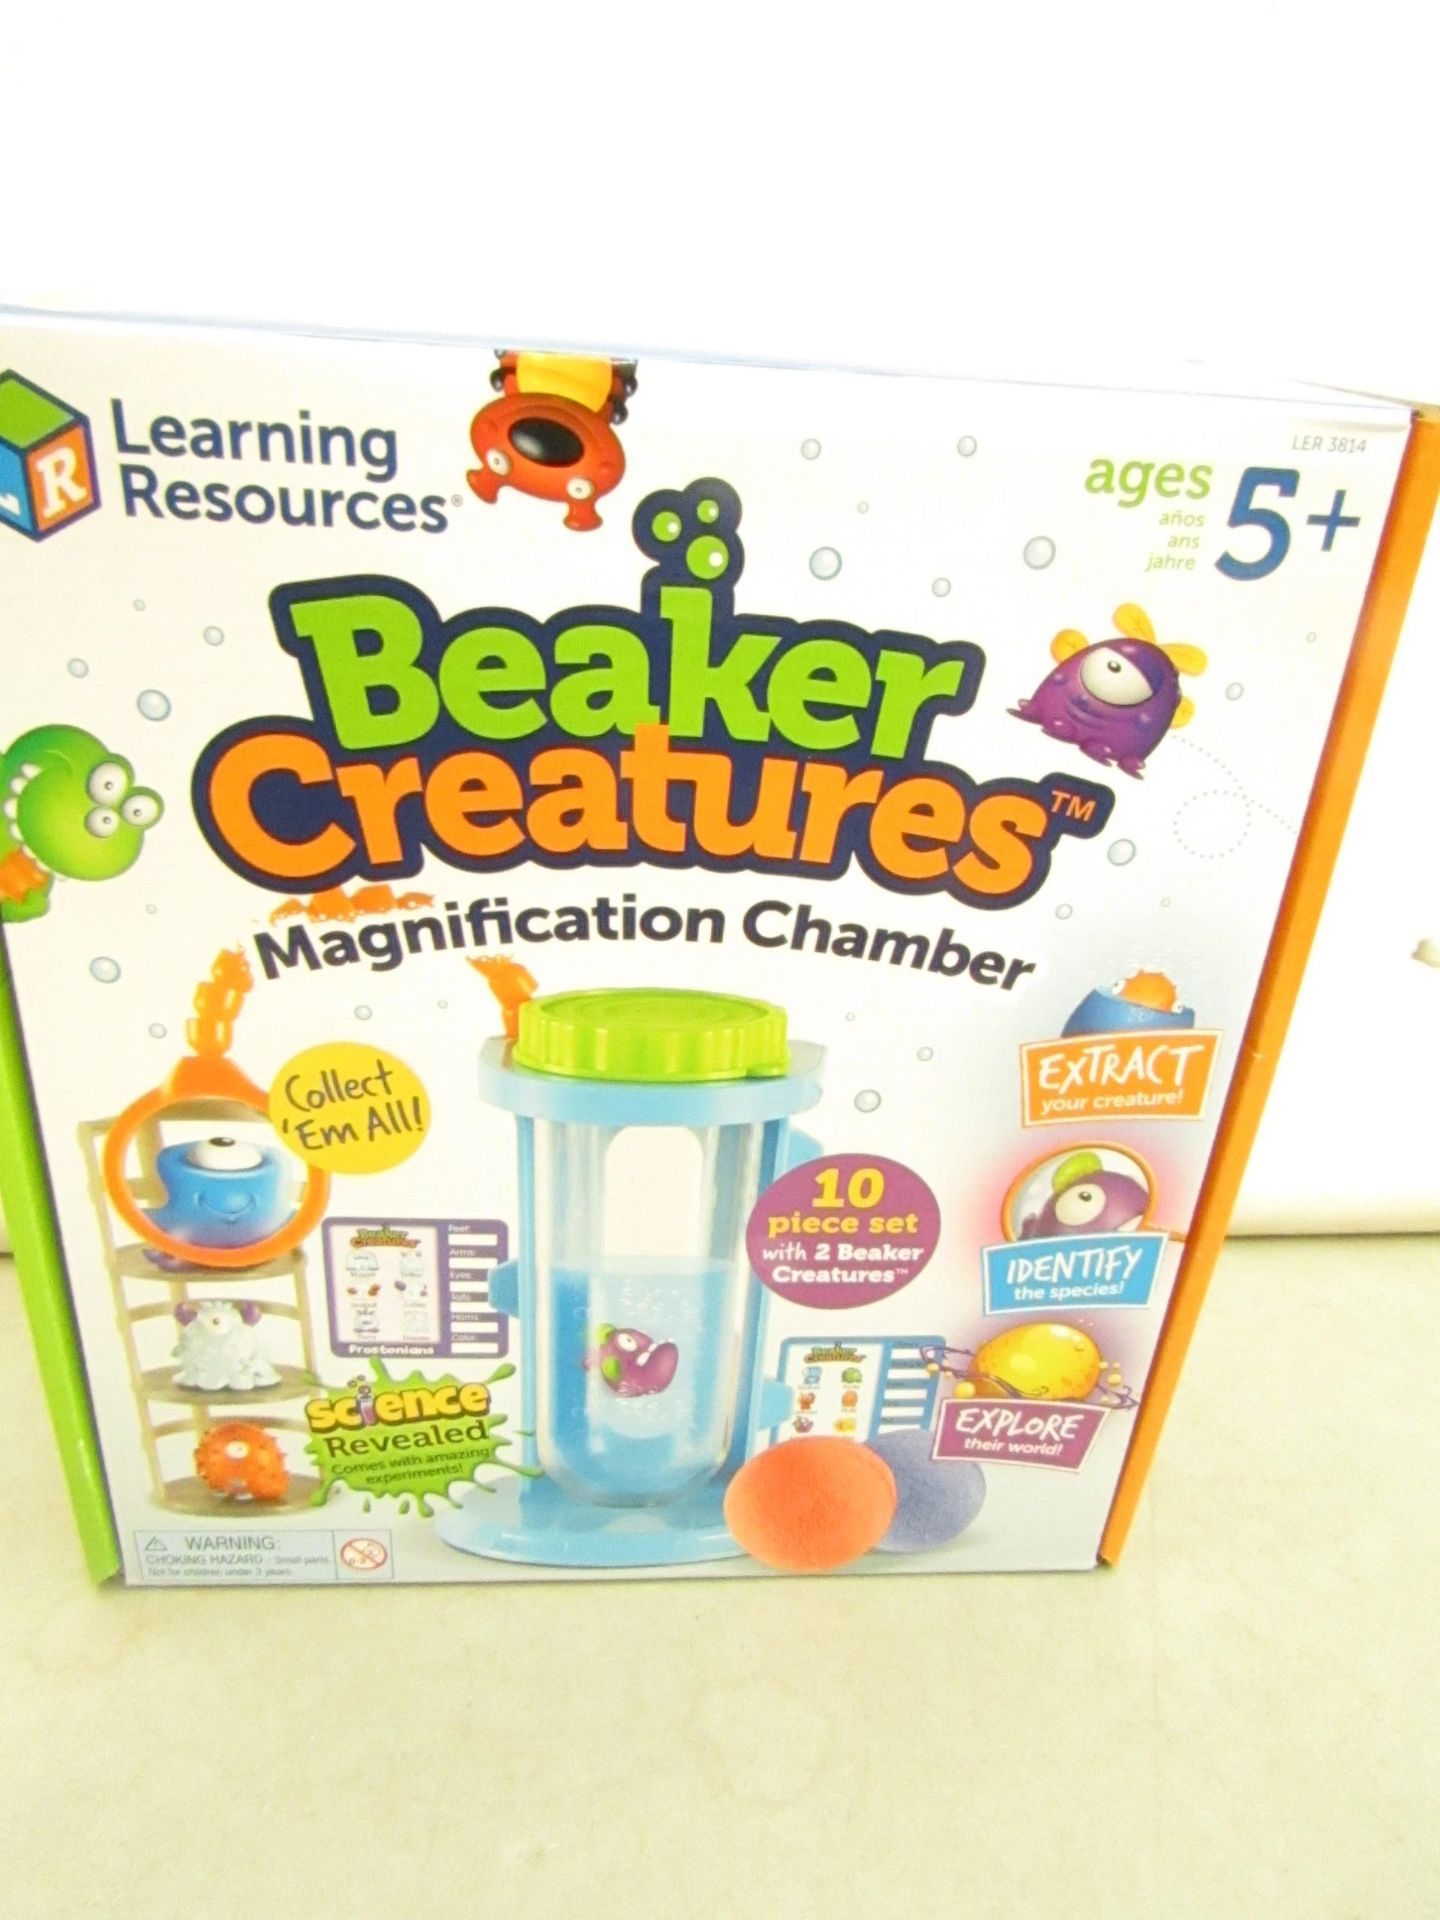 Learning resources Beaker Creations Magnification Chamber 10 Piece set with 2 Beaker creations.